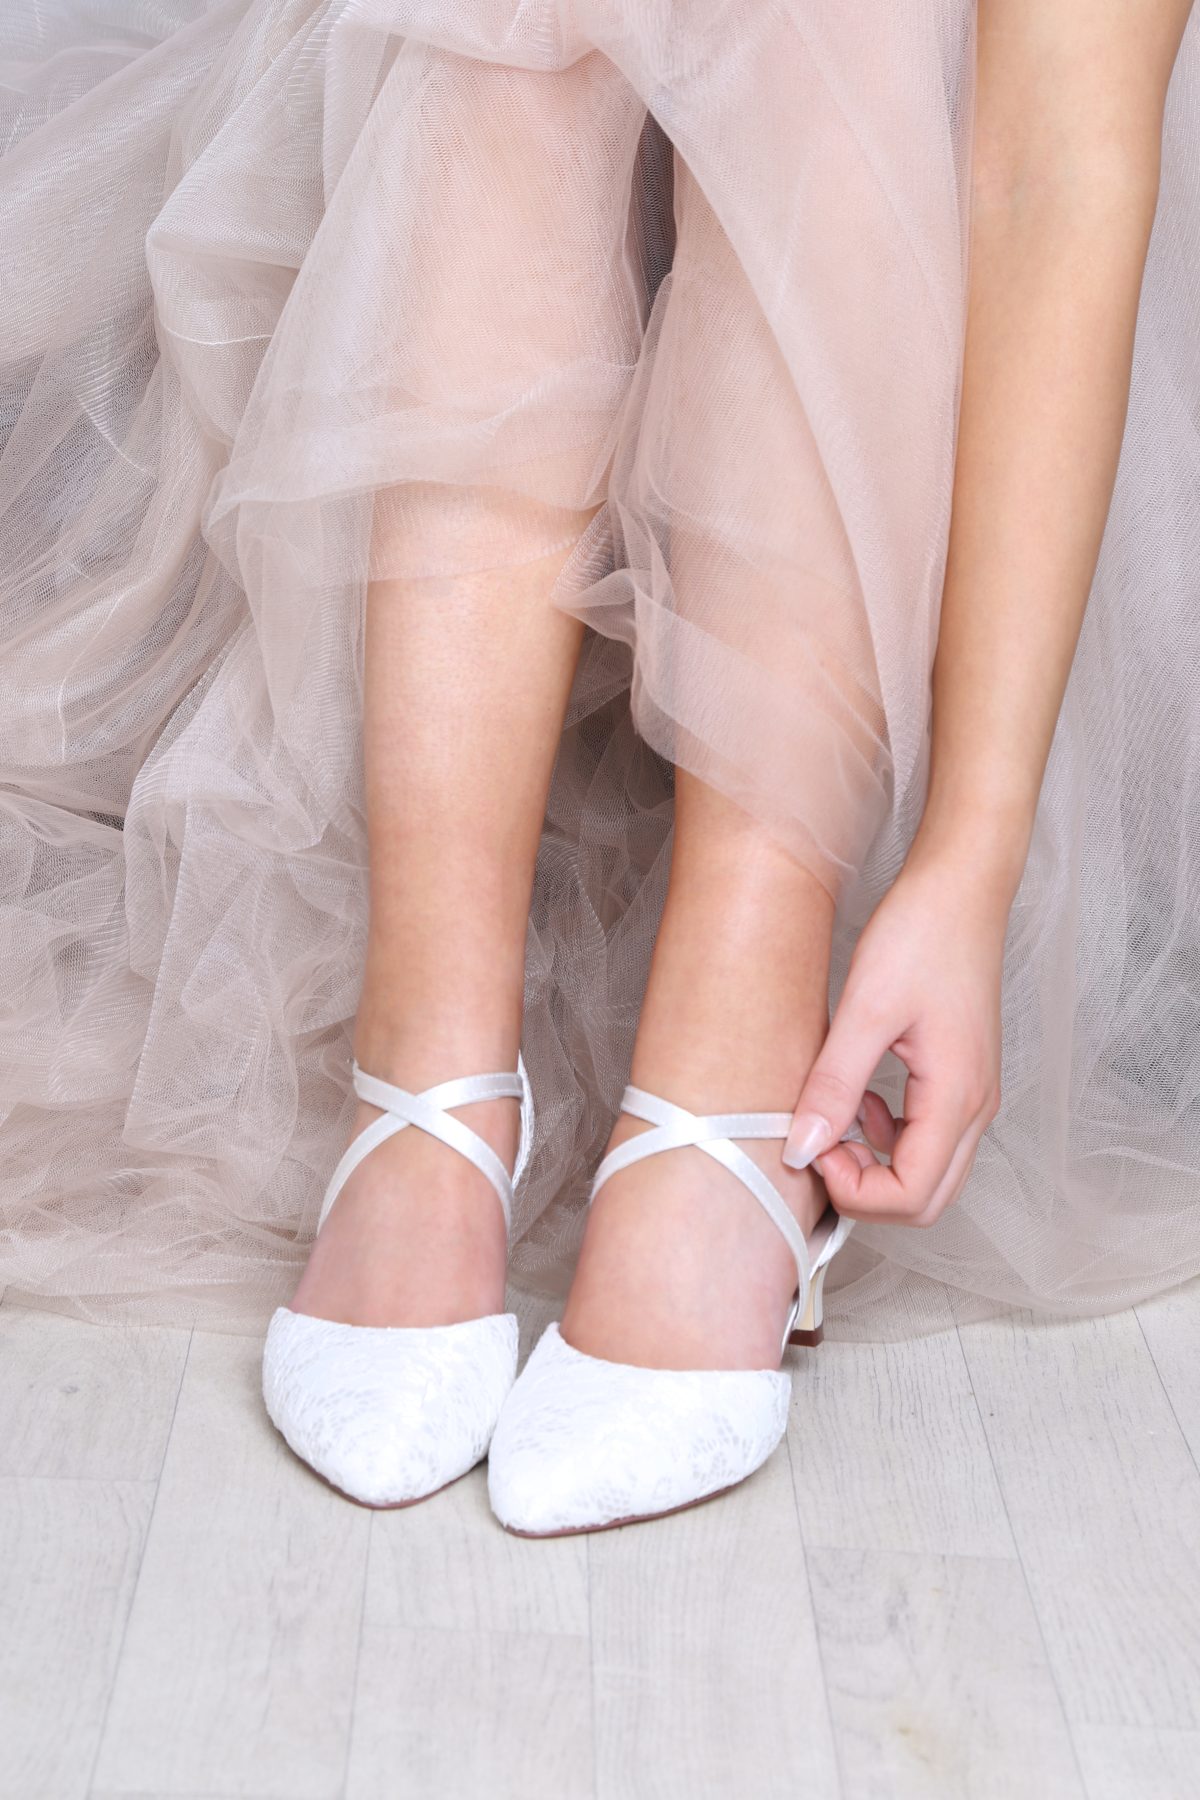 Perfect Bridal Renate Shoes - Ivory Lace